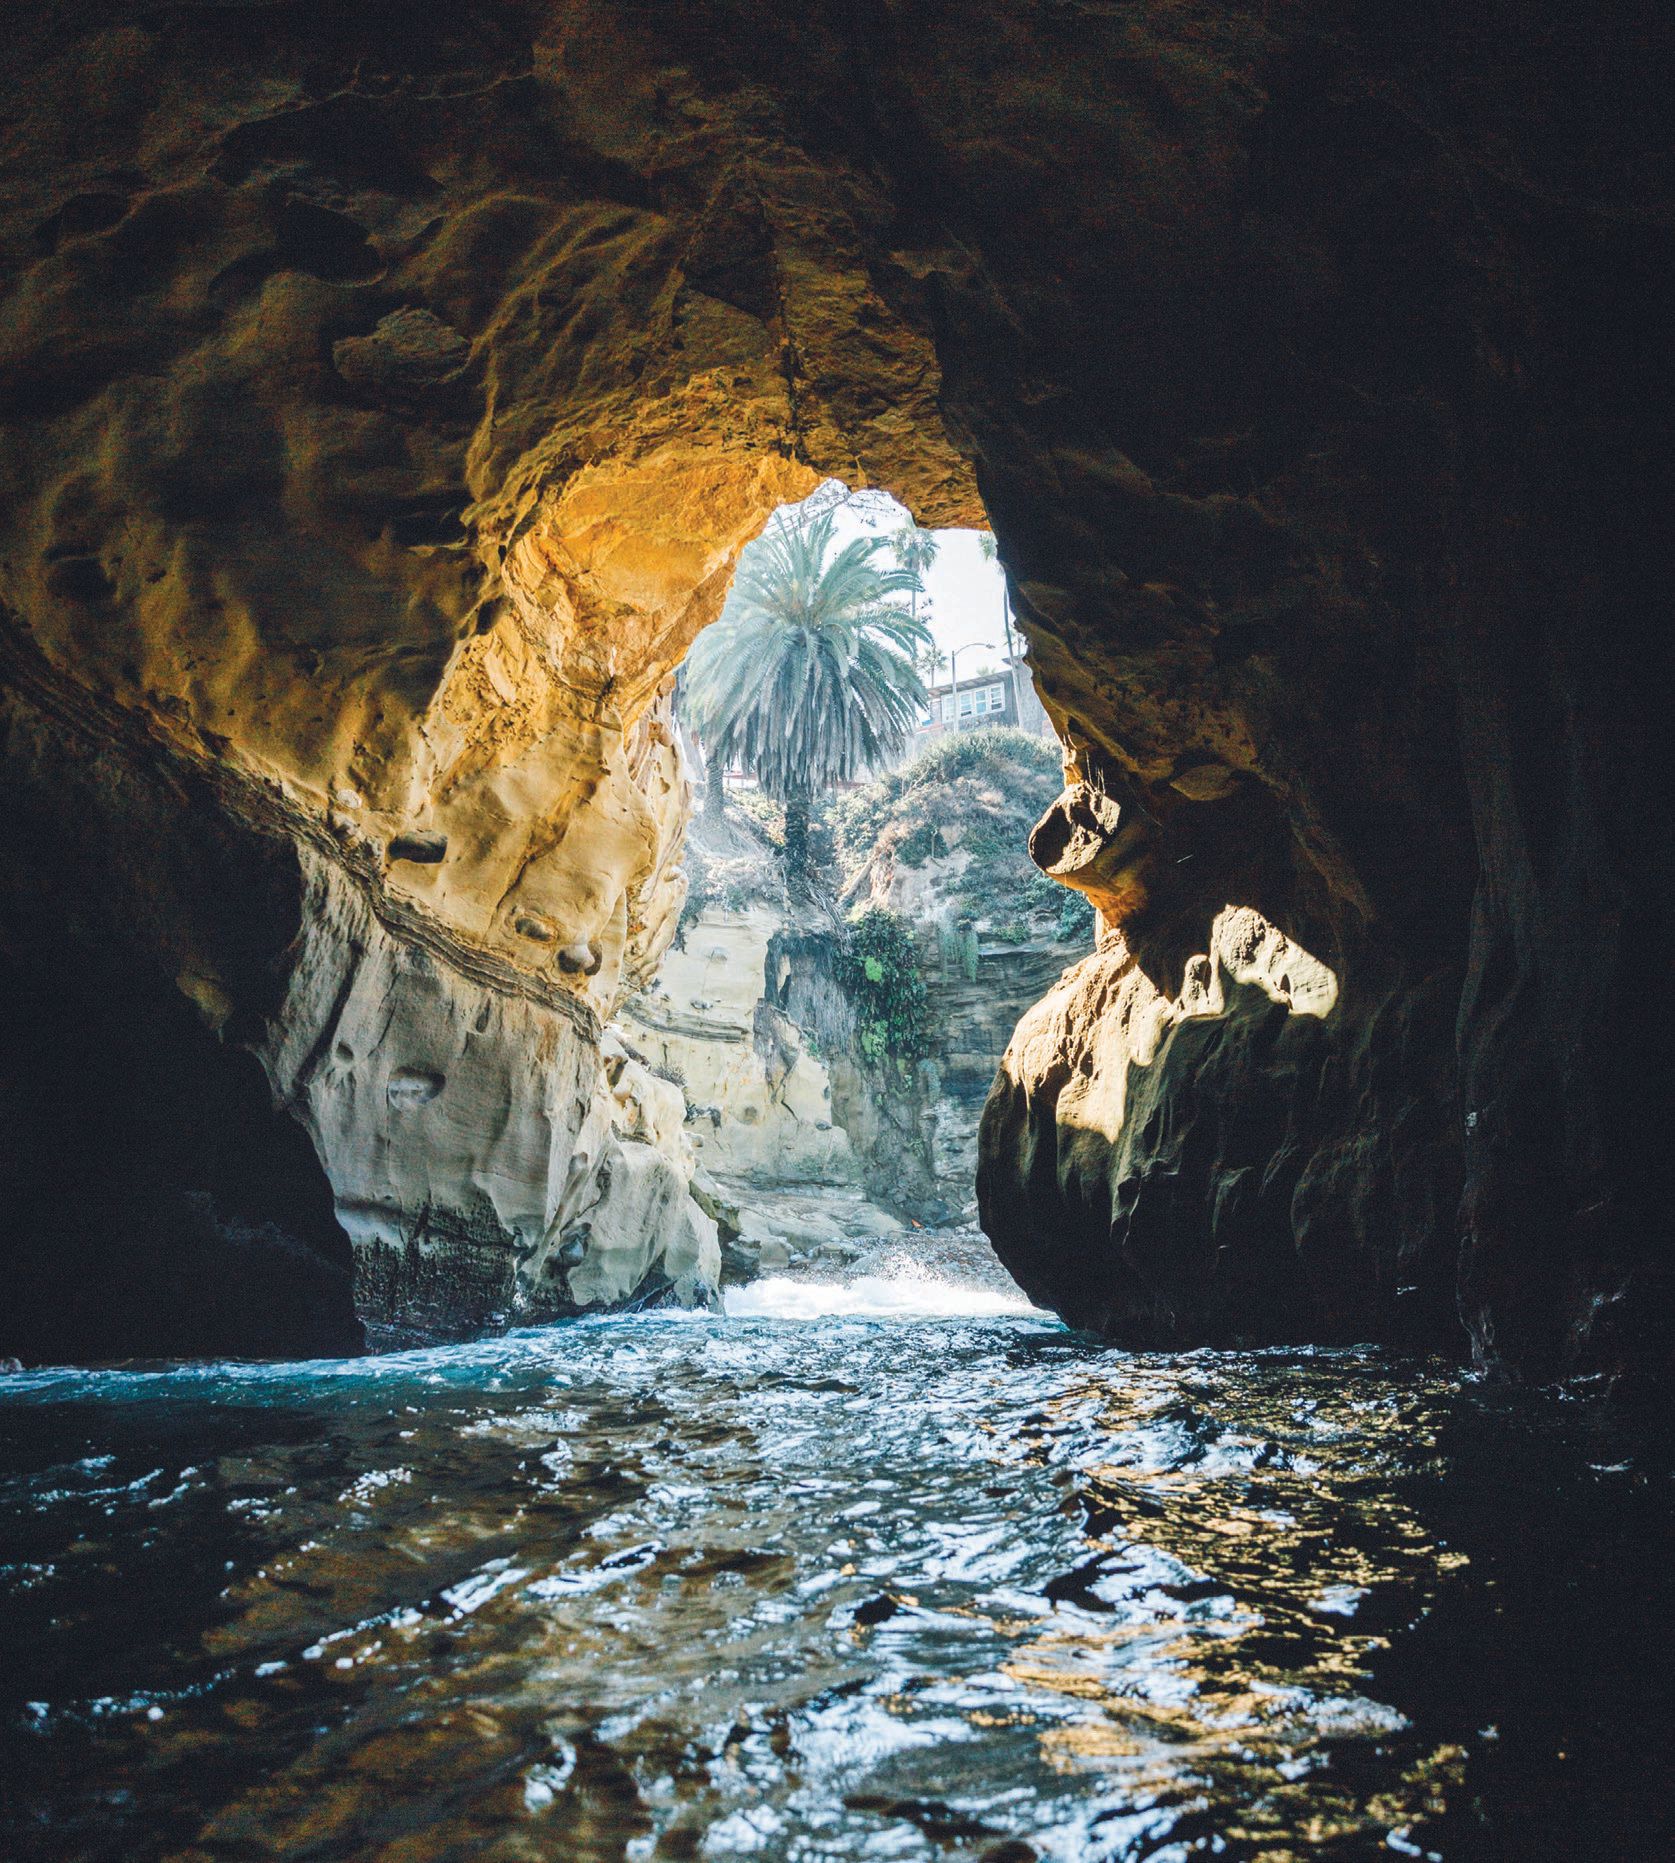 From kayaking in caves to whale watching, Everyday California offers adventure seekers unique experiences in San Diego. PHOTO COURTESY OF EVERYDAY CALIFORNIA